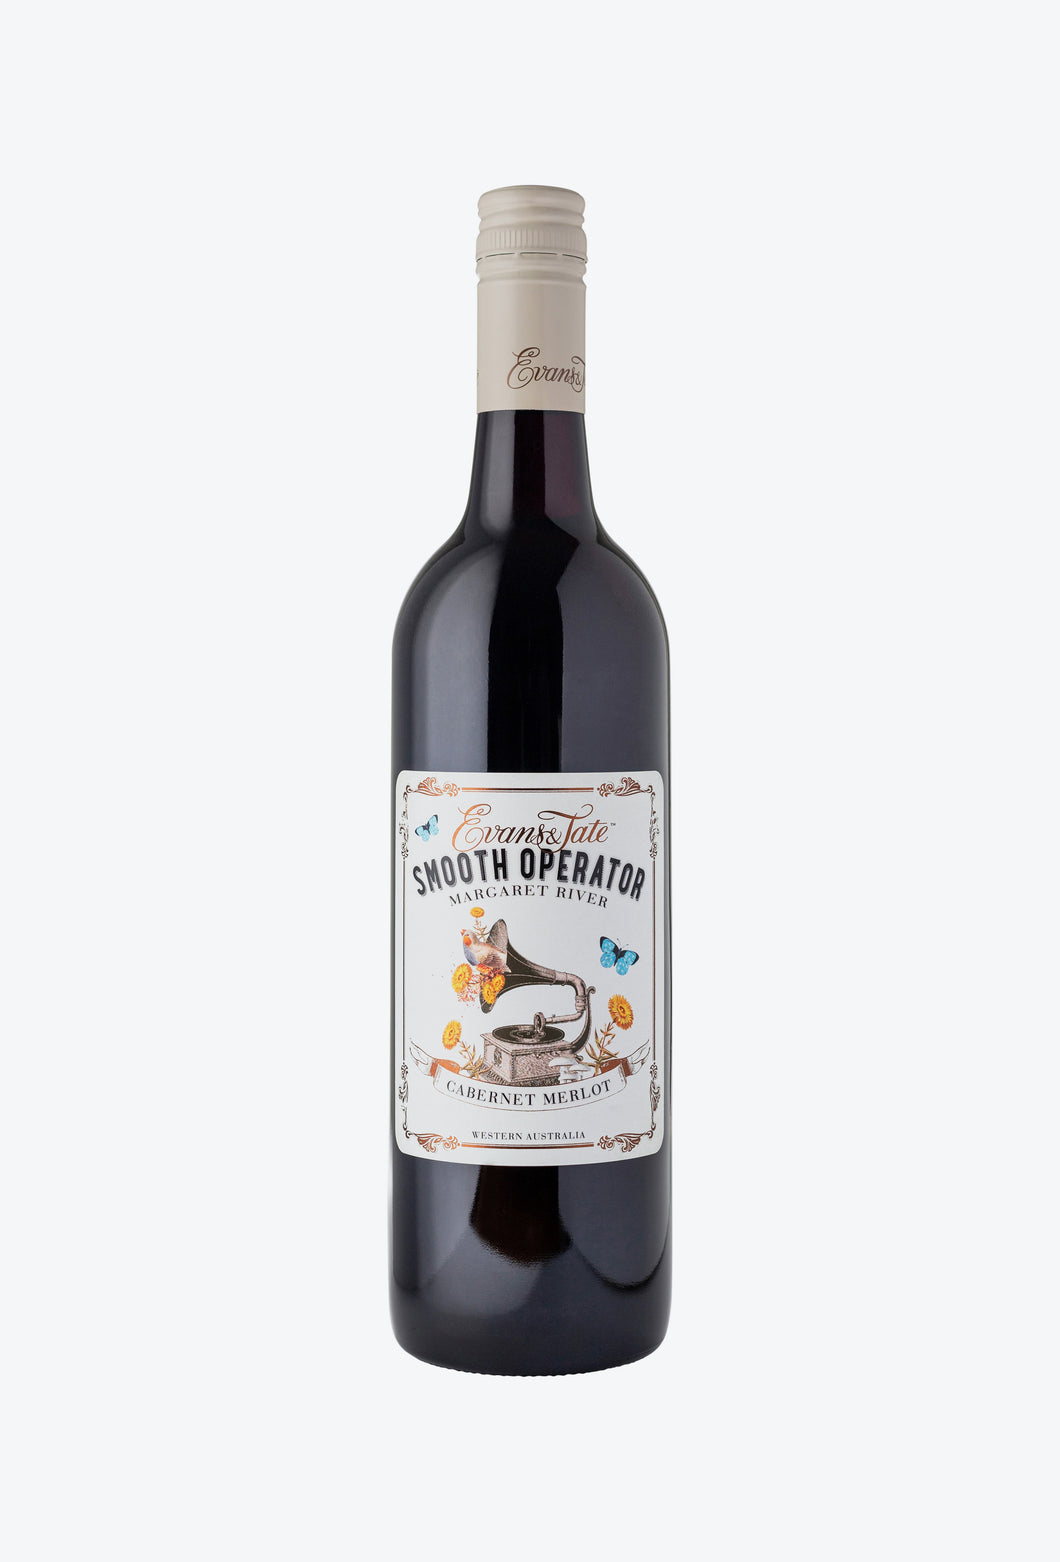 2019 Expressions Smooth Operator Cabernet Merlot